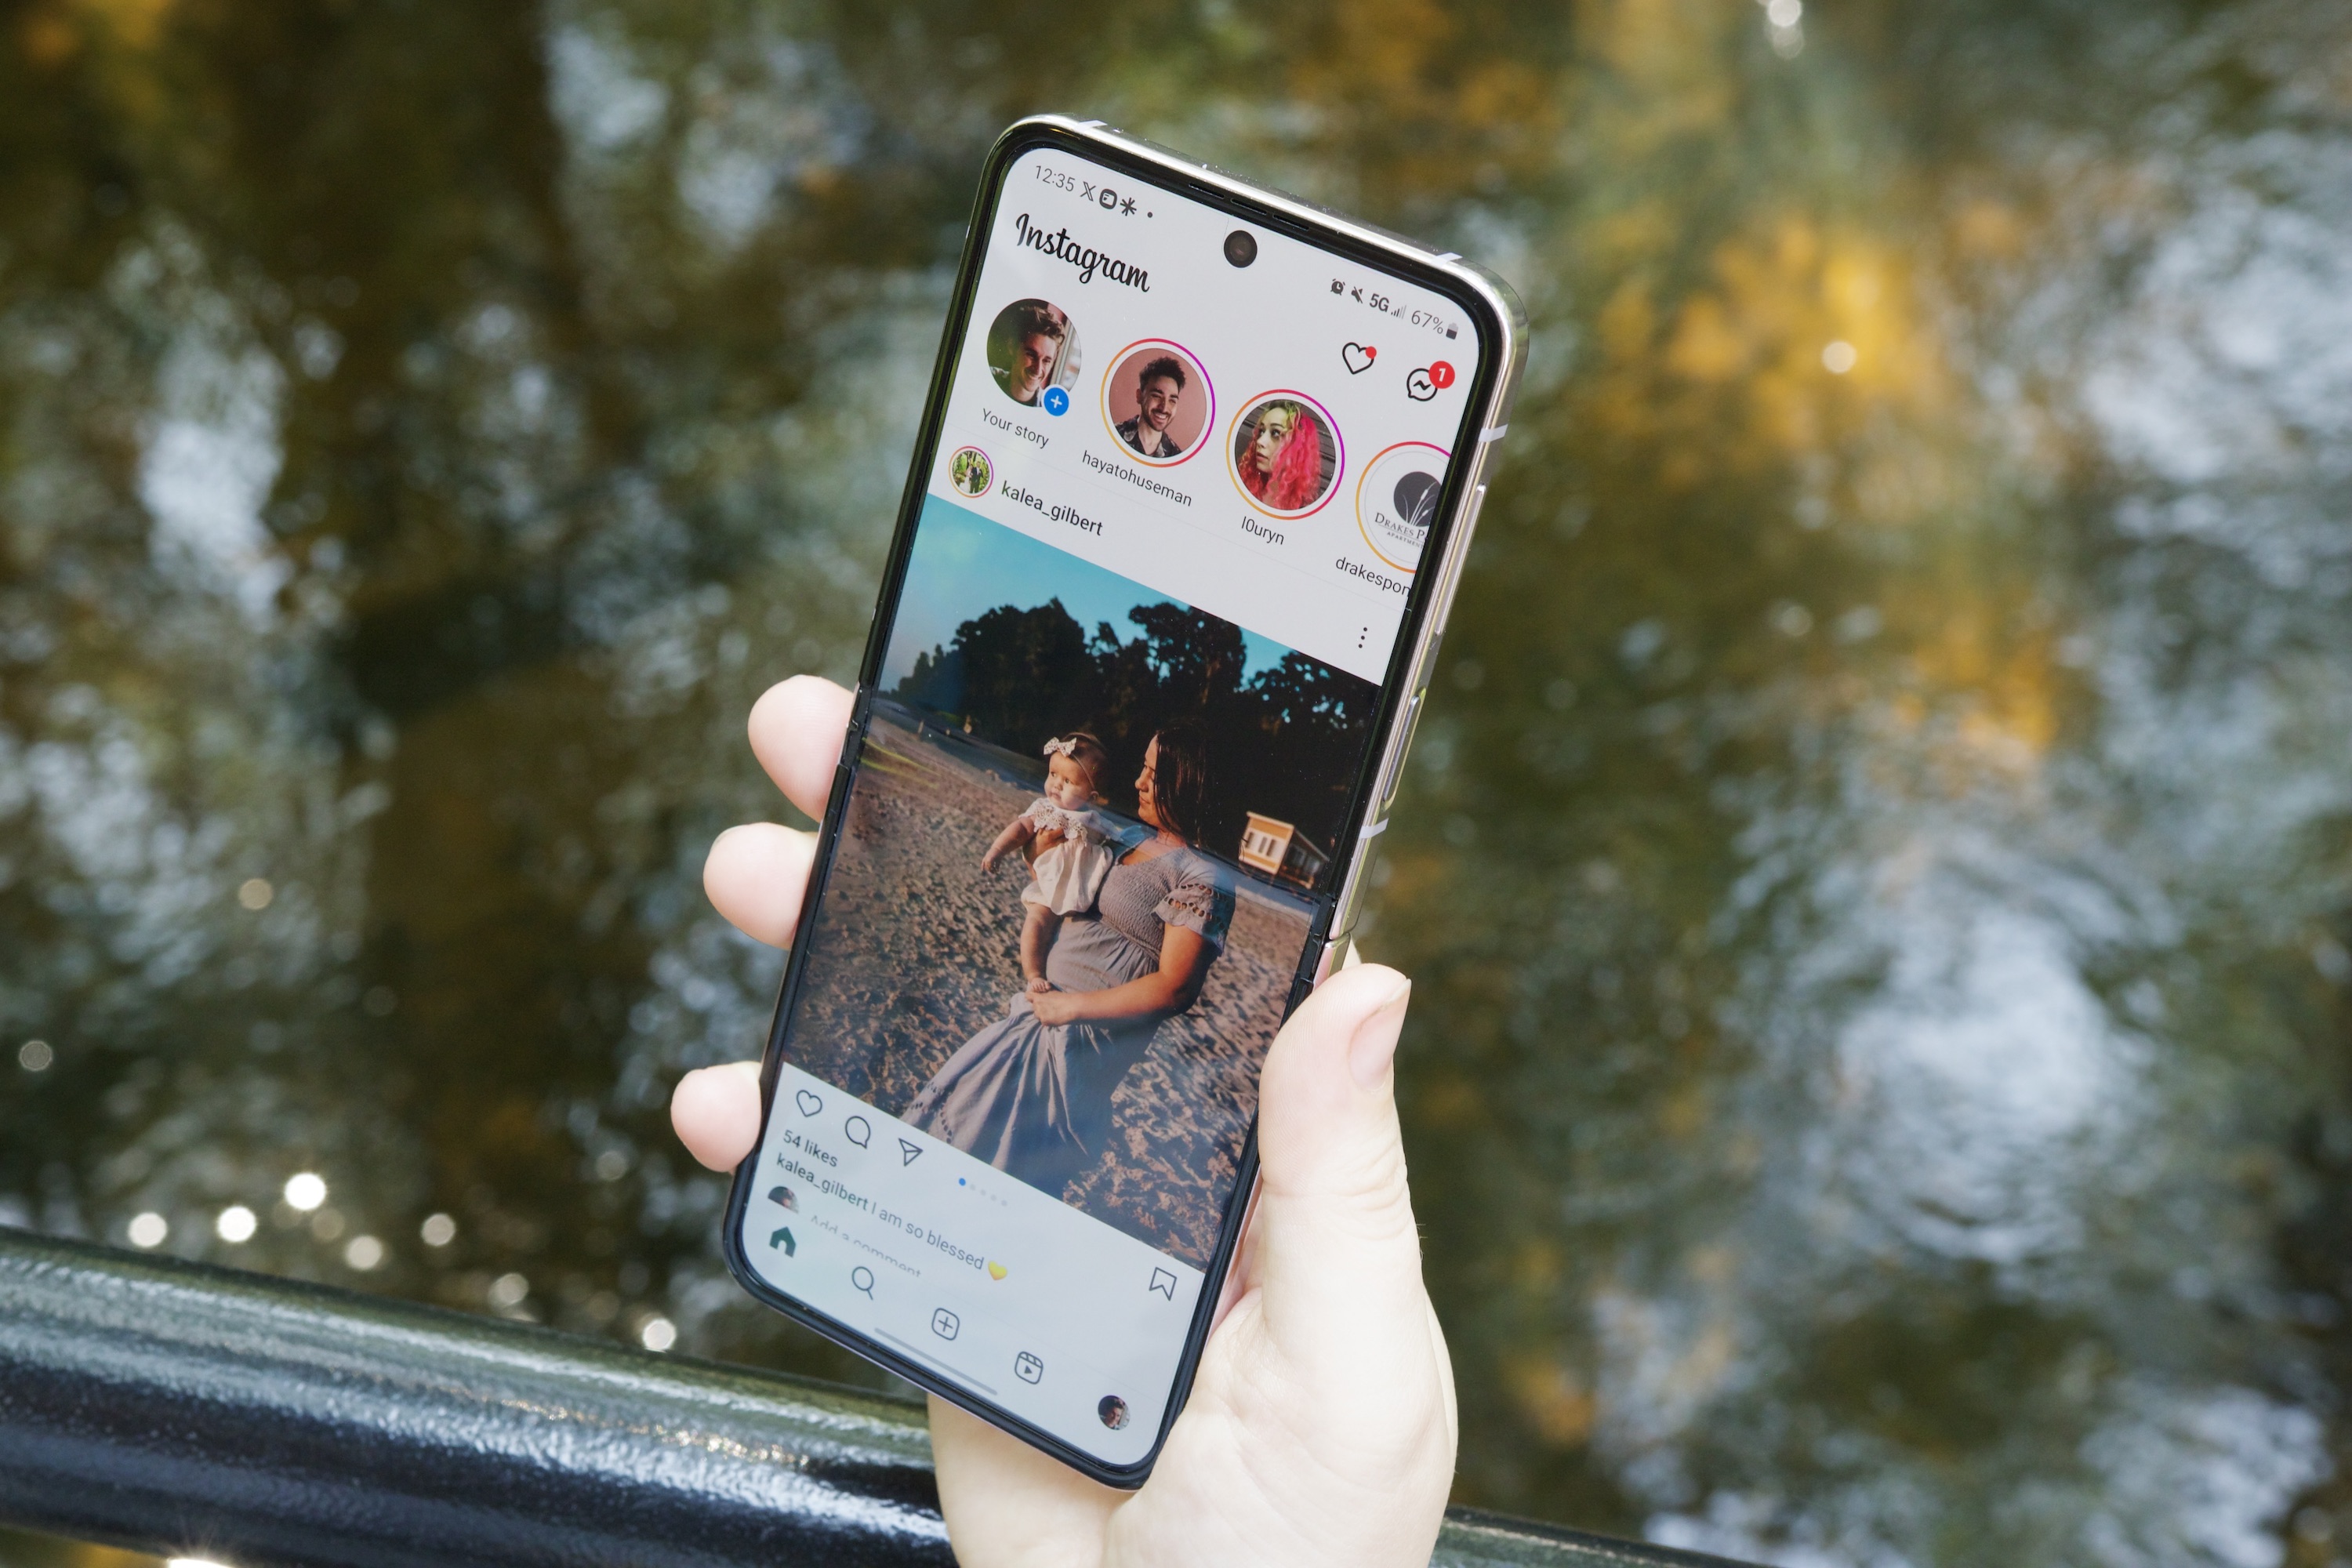 How to download Instagram photos (5 easy ways)